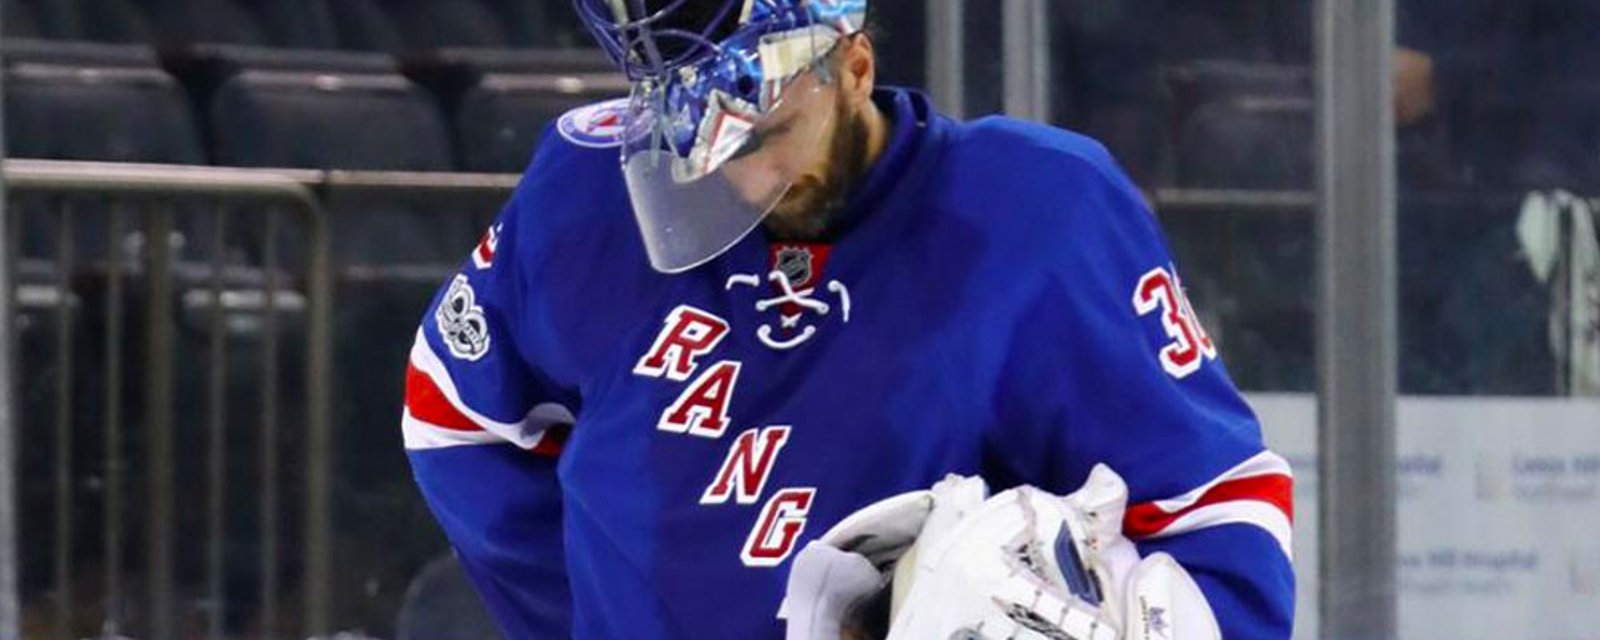 Henrik Lundqvist has played his last game as a Ranger…